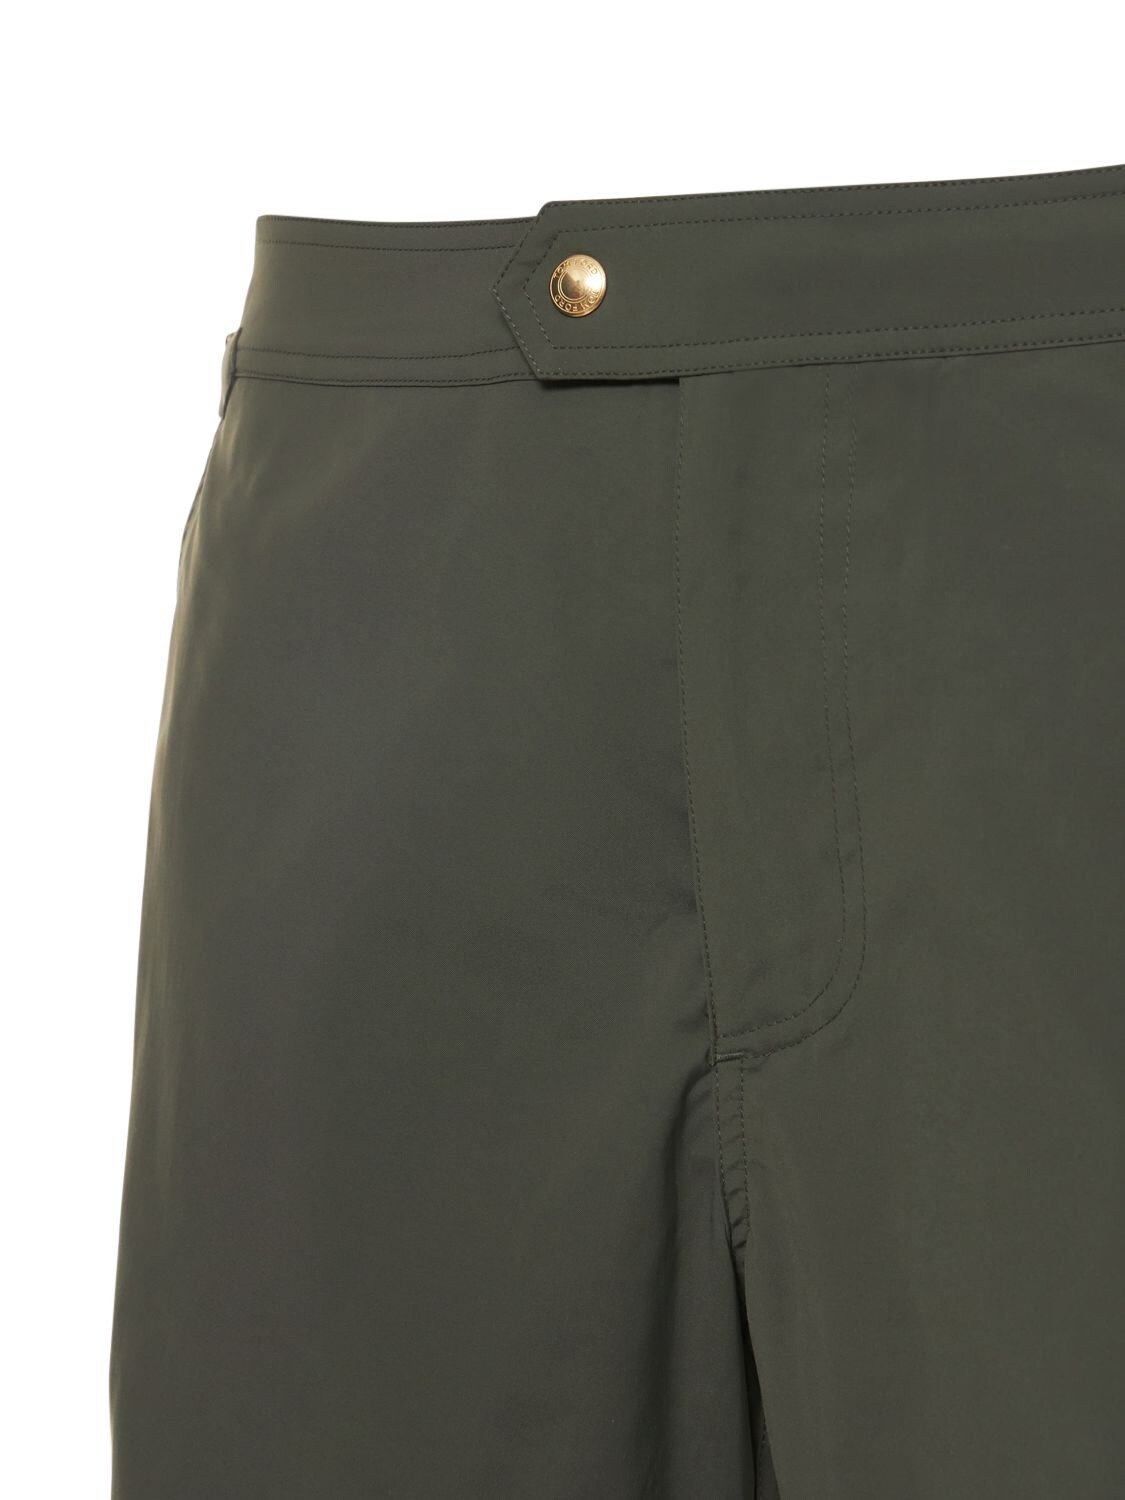 Shop Tom Ford Compact Poplin Swim Shorts W/ Piping In Clover